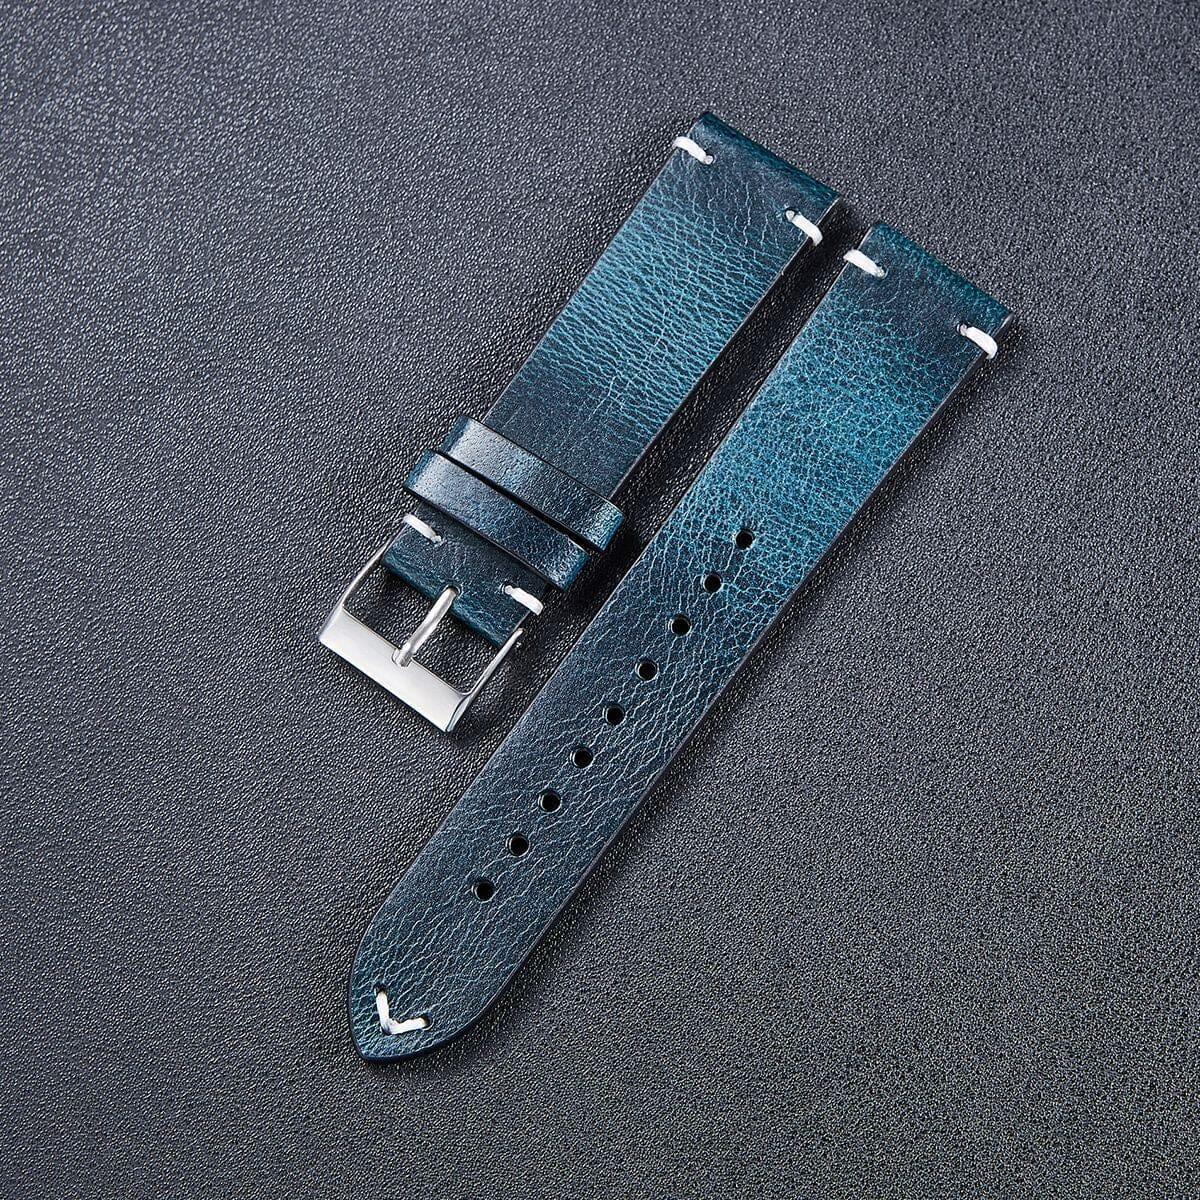 Vintage Oiled Leather Watch Straps Compatible with the Skagen 20mm Range